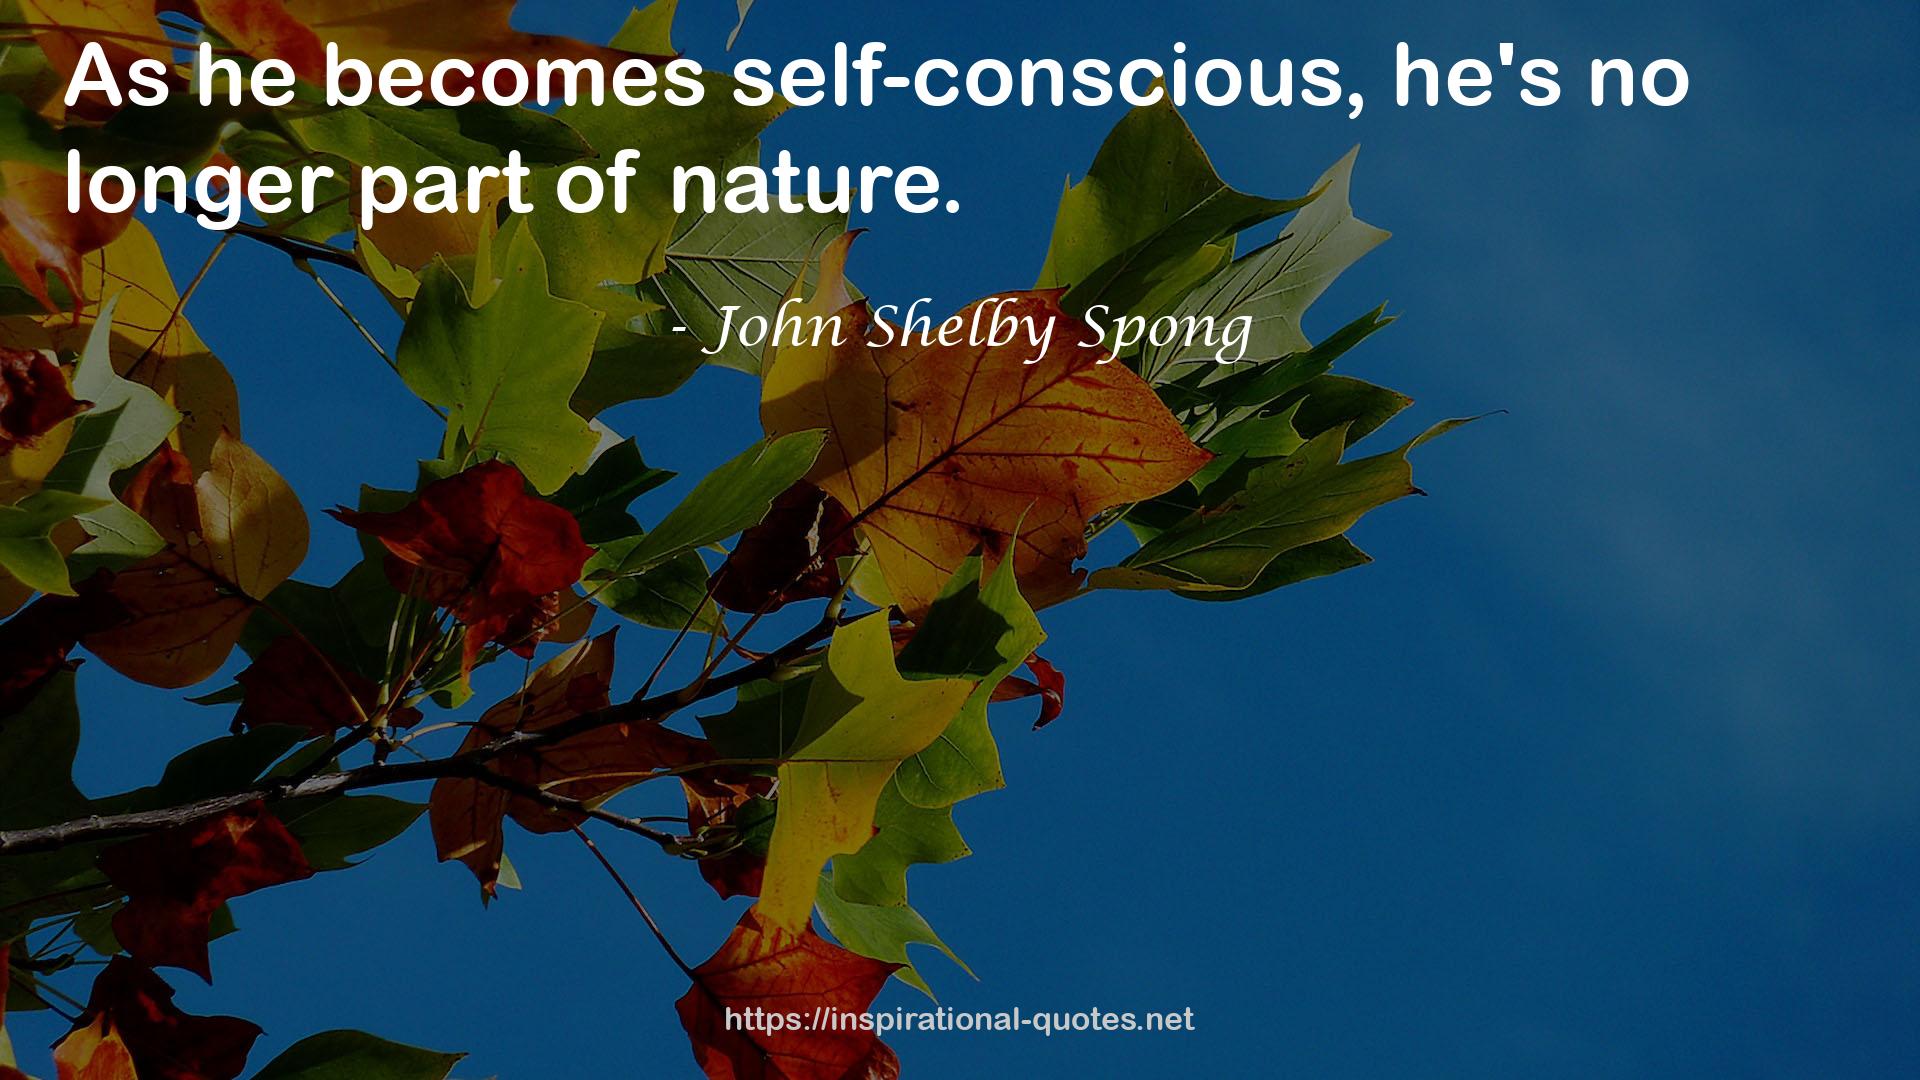 John Shelby Spong QUOTES